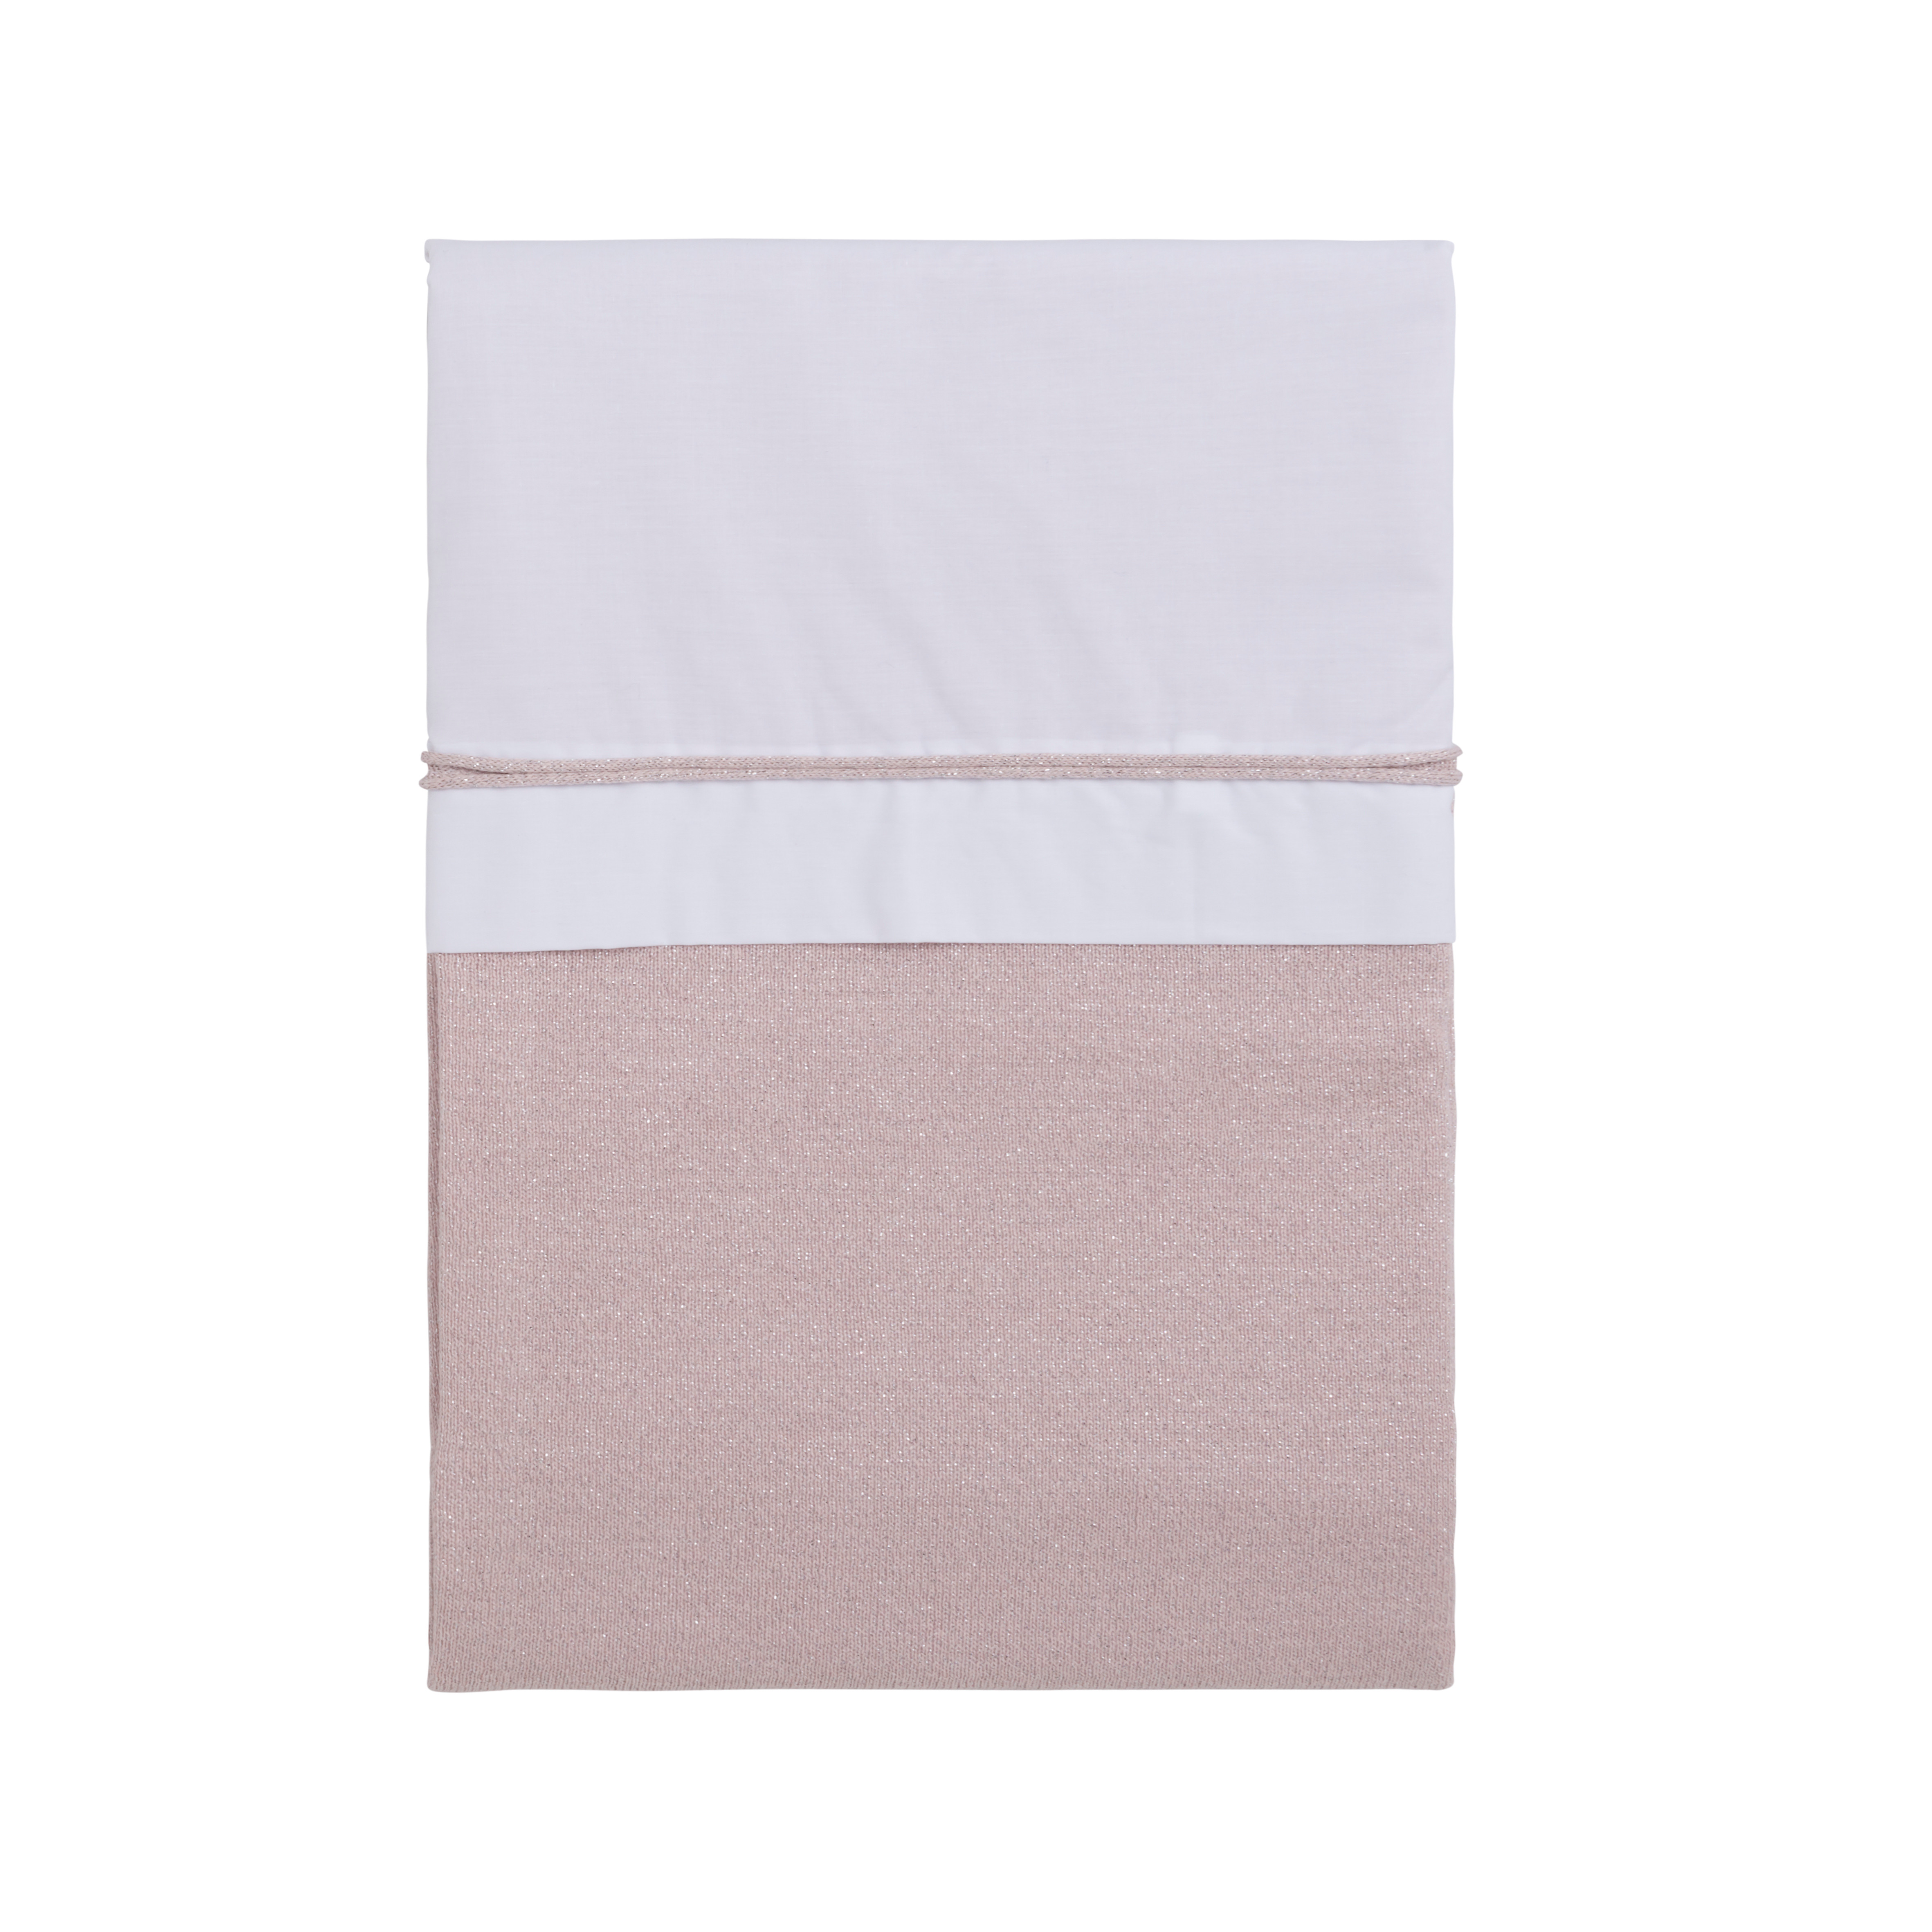 Duvet cover Sparkle silver-pink melee - 100x135